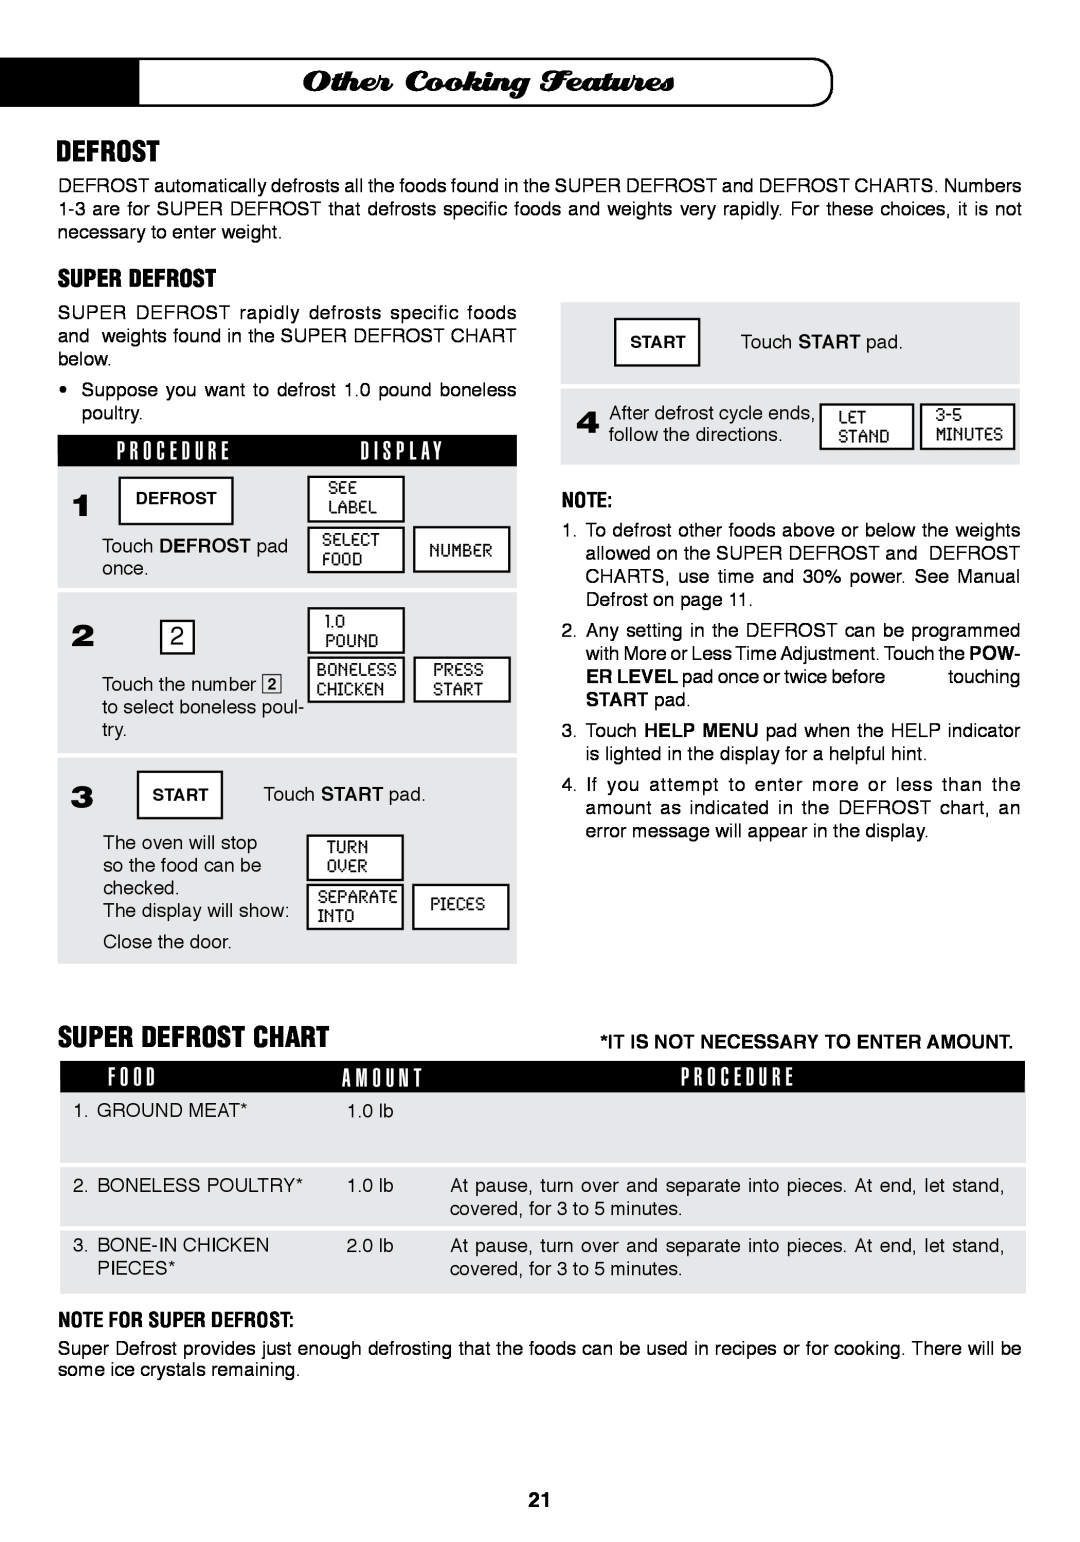 Fisher & Paykel MO-24SS Super Defrost Chart, Note For Super Defrost, Other Cooking Features, D I S P L A Y 